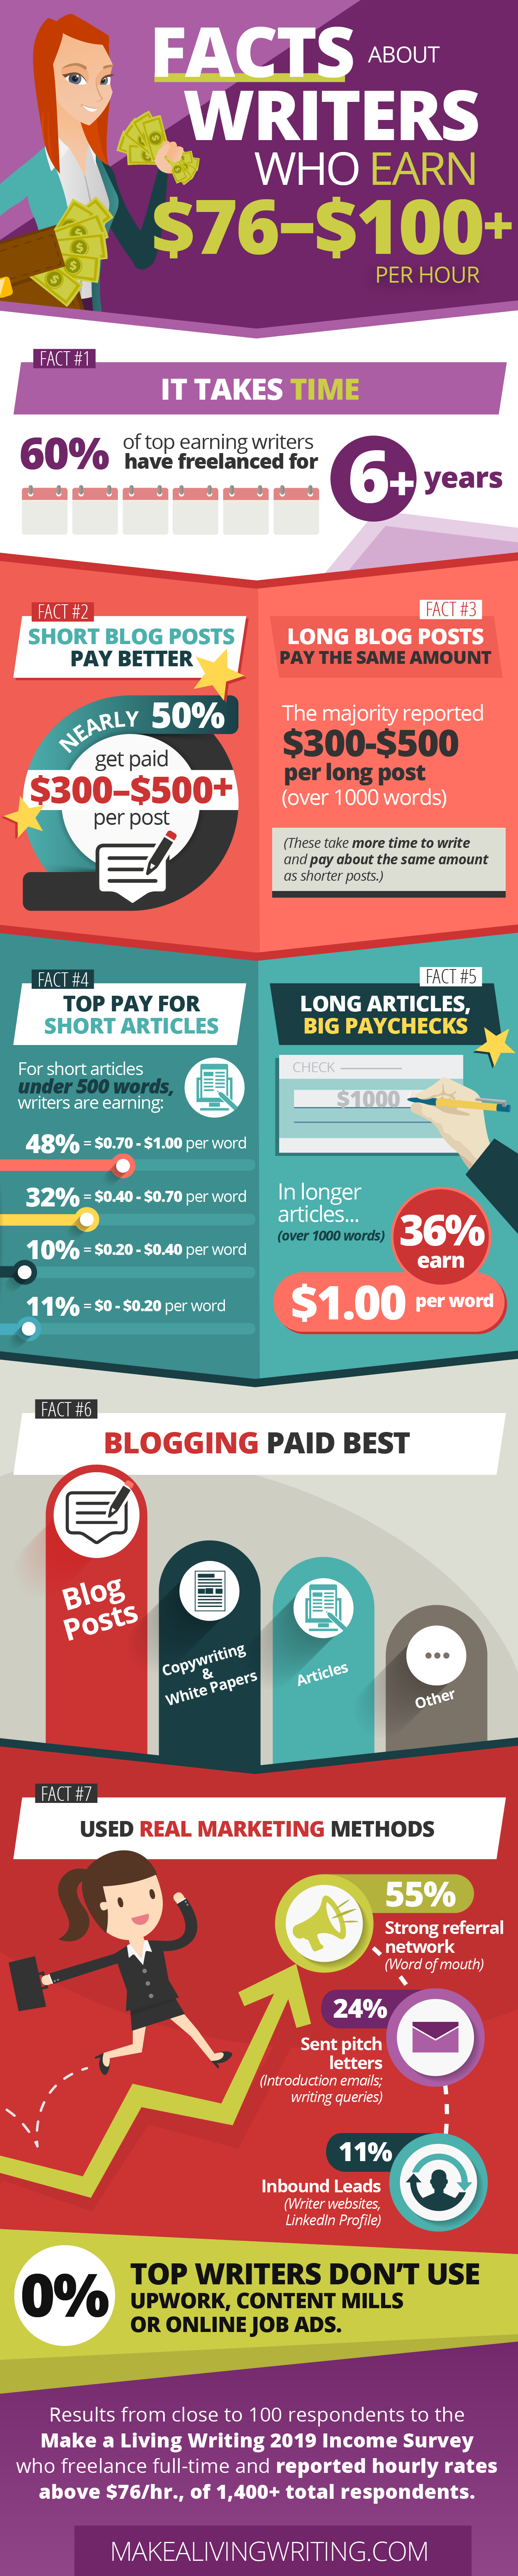 Get Paid to Write: Facts About Writers Who Earn $76-100 per hour. 60% of writers take 6+ years to earn top rates. Half get $300+ for blog posts, and a similar amount for articles. Blogging paid best. 0% use Upwork or content mills. Makealivingwriting.com pay survey